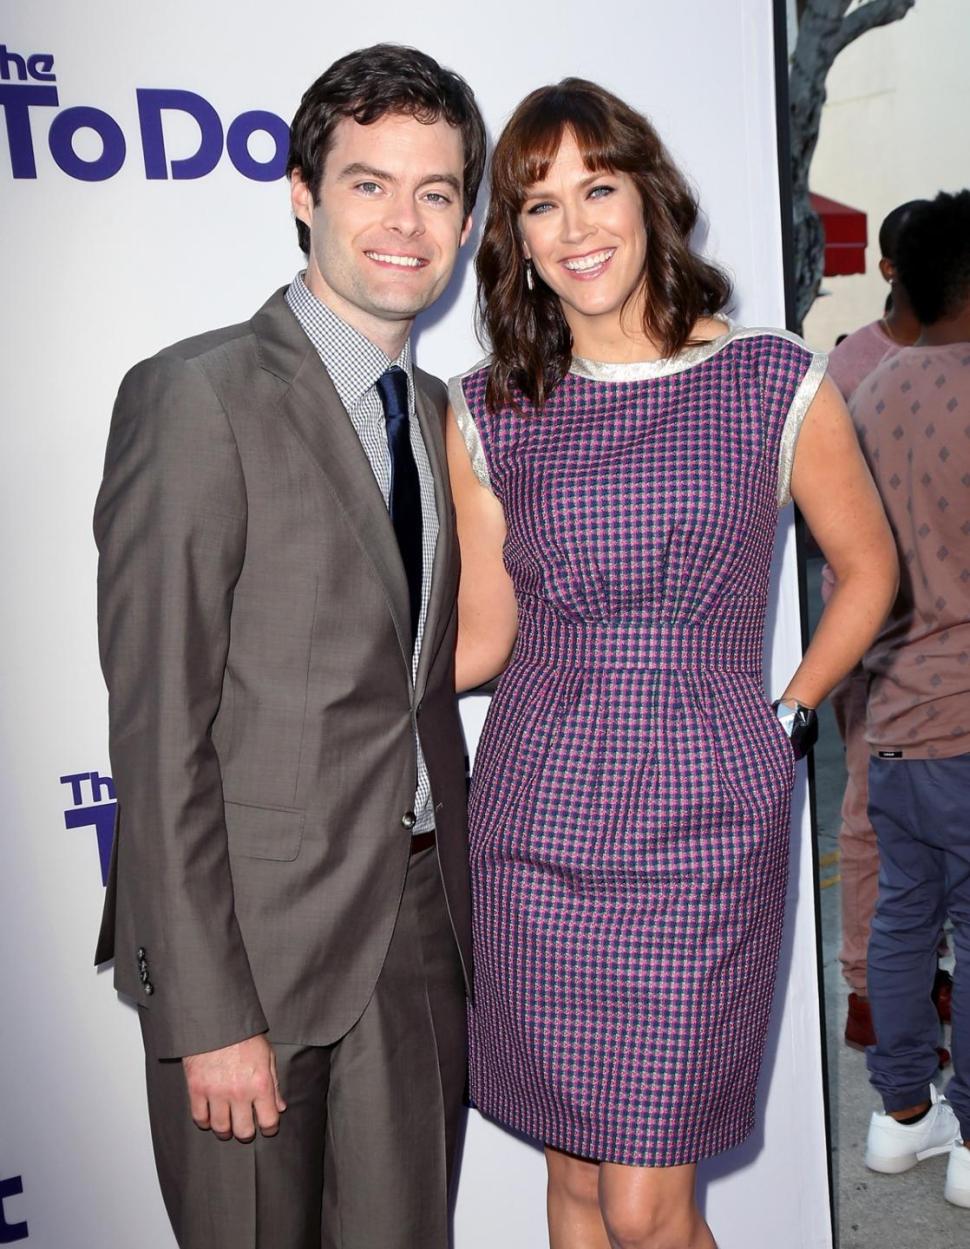 Bill Hader (L) and wife writer-director Maggie Carey attend the premiere of CBS Films' ‘The To Do List’ at the Regency Bruin Theatre on July 23, 2013 in Westwood, Calif.